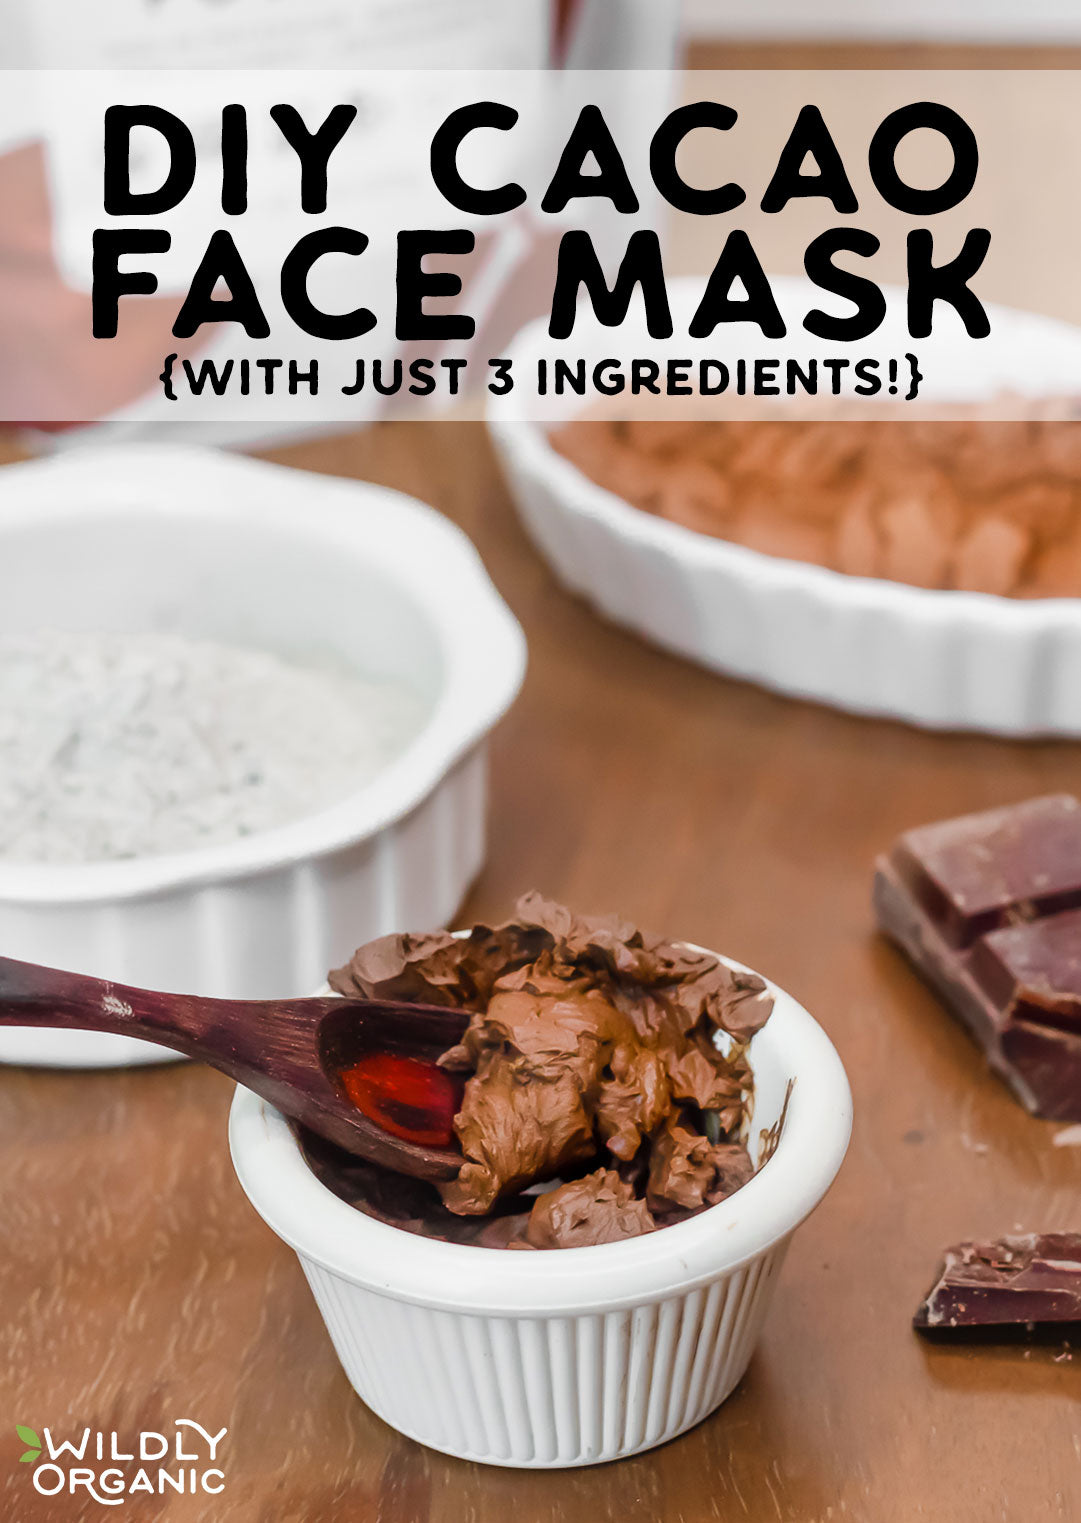 DIY Cacao Face Mask {with just 3 ingredients!}